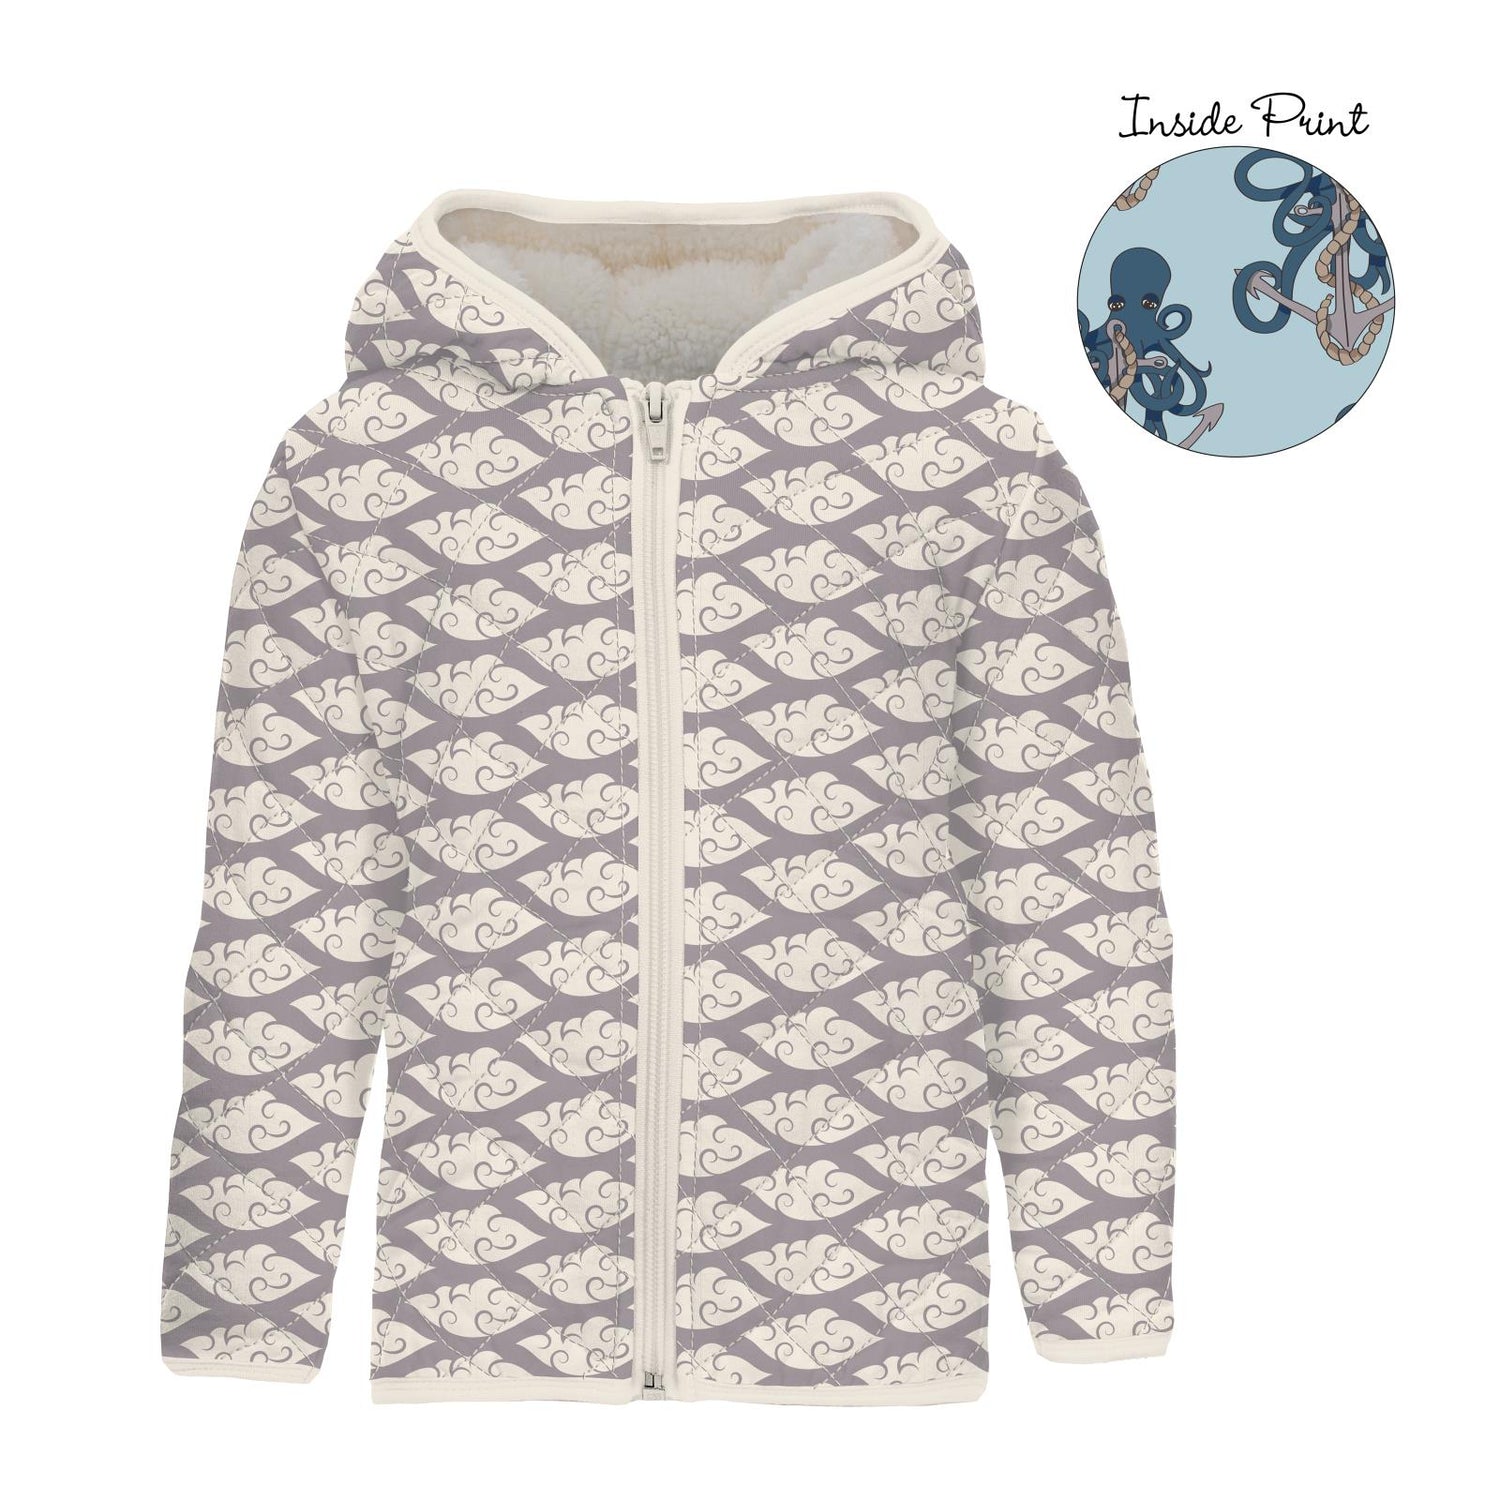 Print Quilted Jacket with Sherpa-Lined Hood in Feather Cloudy Sea/Spring Sky Octopus Anchor